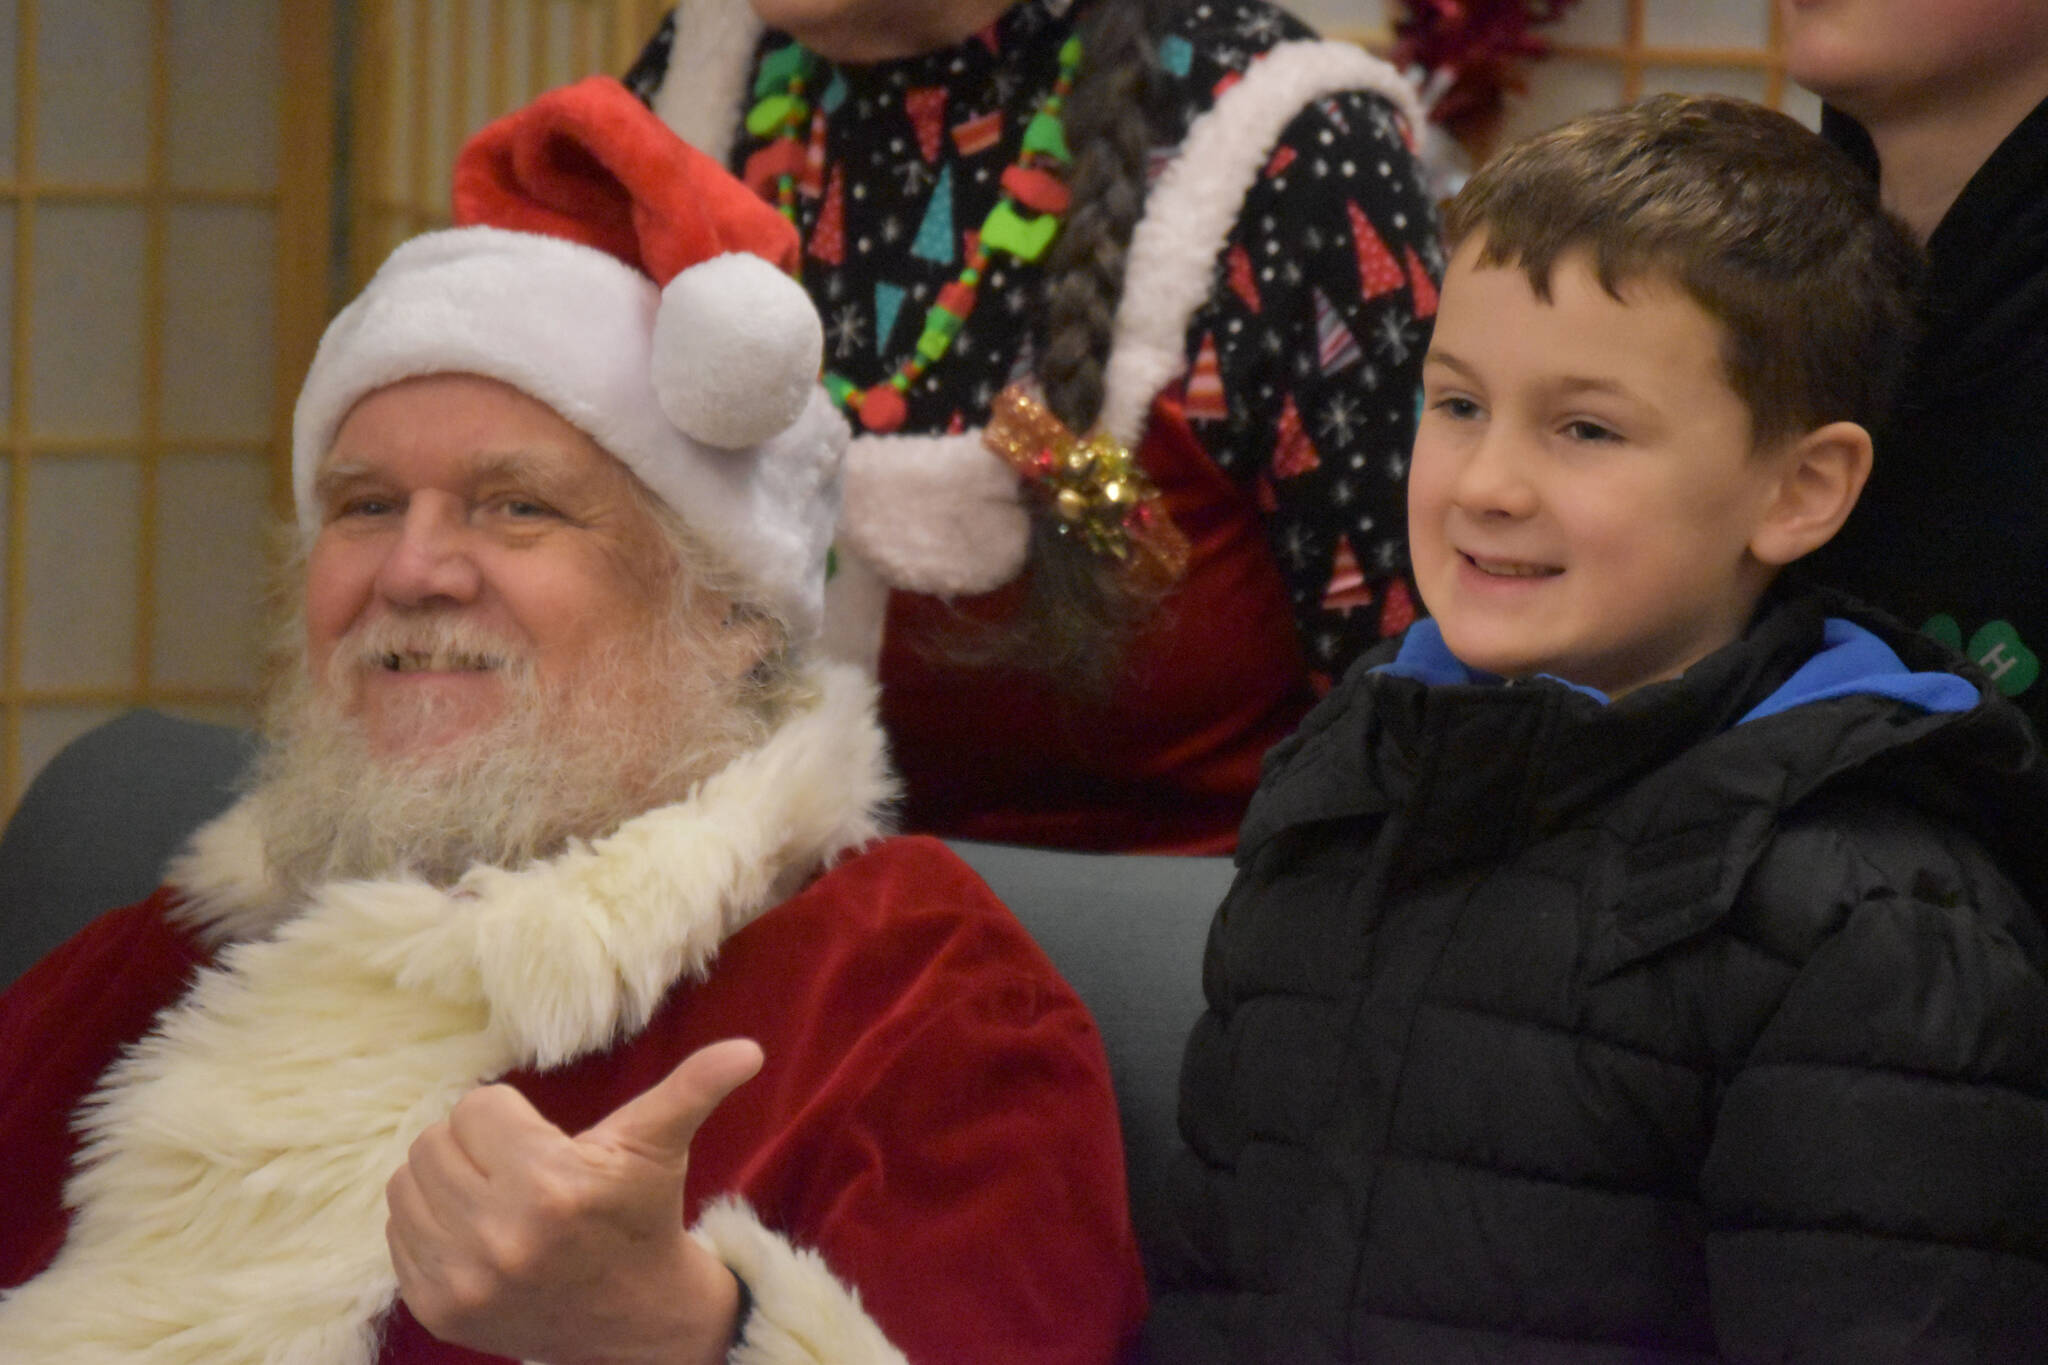 Ken Aaron, in the guise of Santa, smiles for a photo with a group of kids during Breakfast with Santa at the Kenai Senior Center in Kenai, Alaska, on Monday, Dec. 19, 2022. (Jake Dye/Peninsula Clarion)